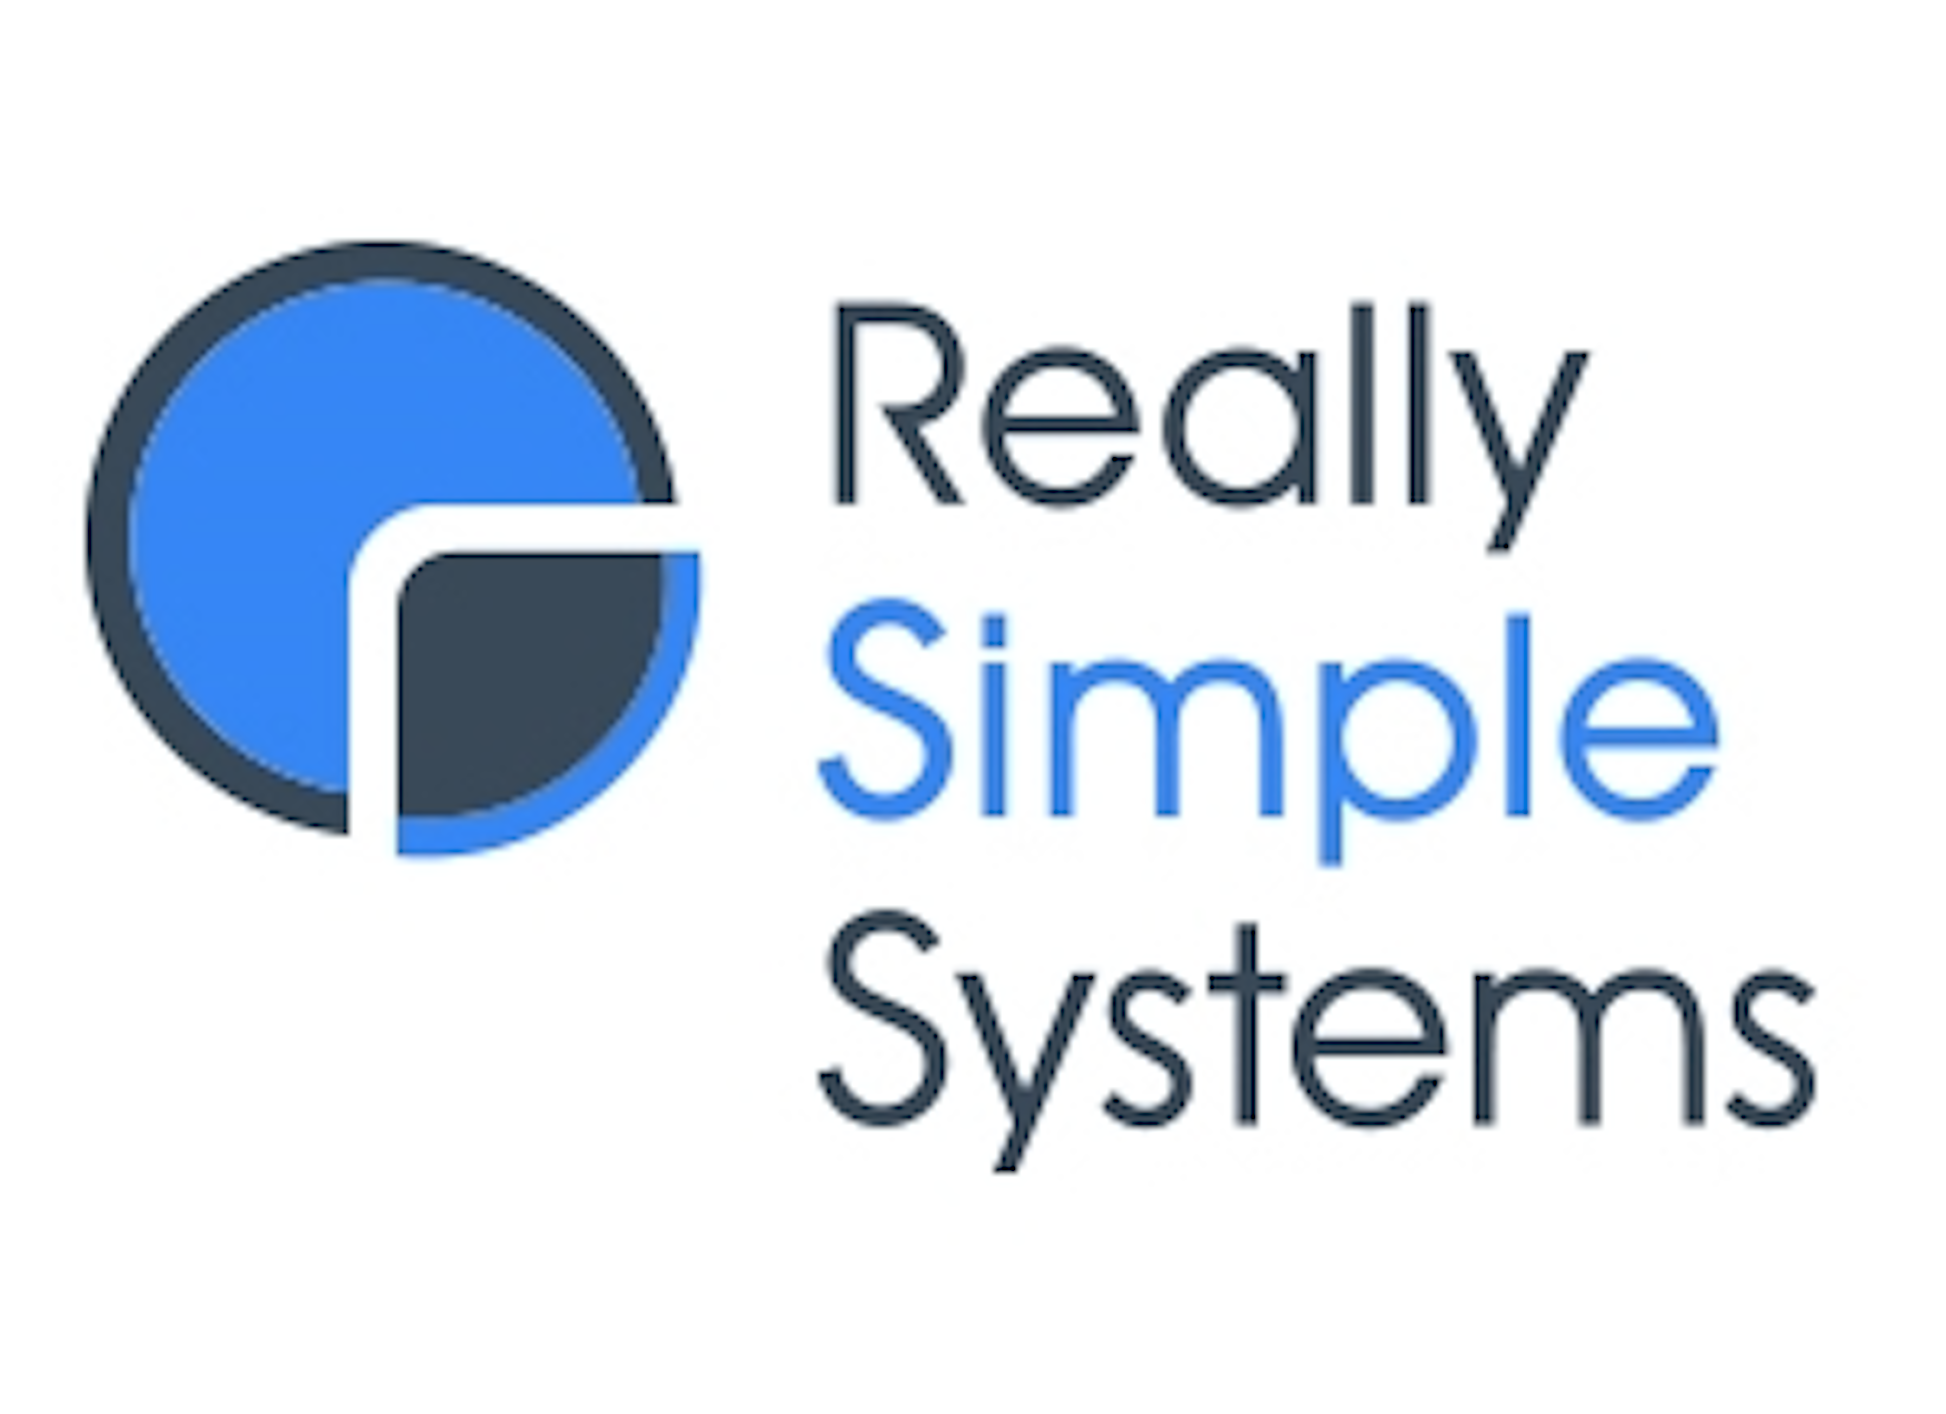 Really Simple Systems CRM Reviews Pros & Cons, Ratings & more GetApp